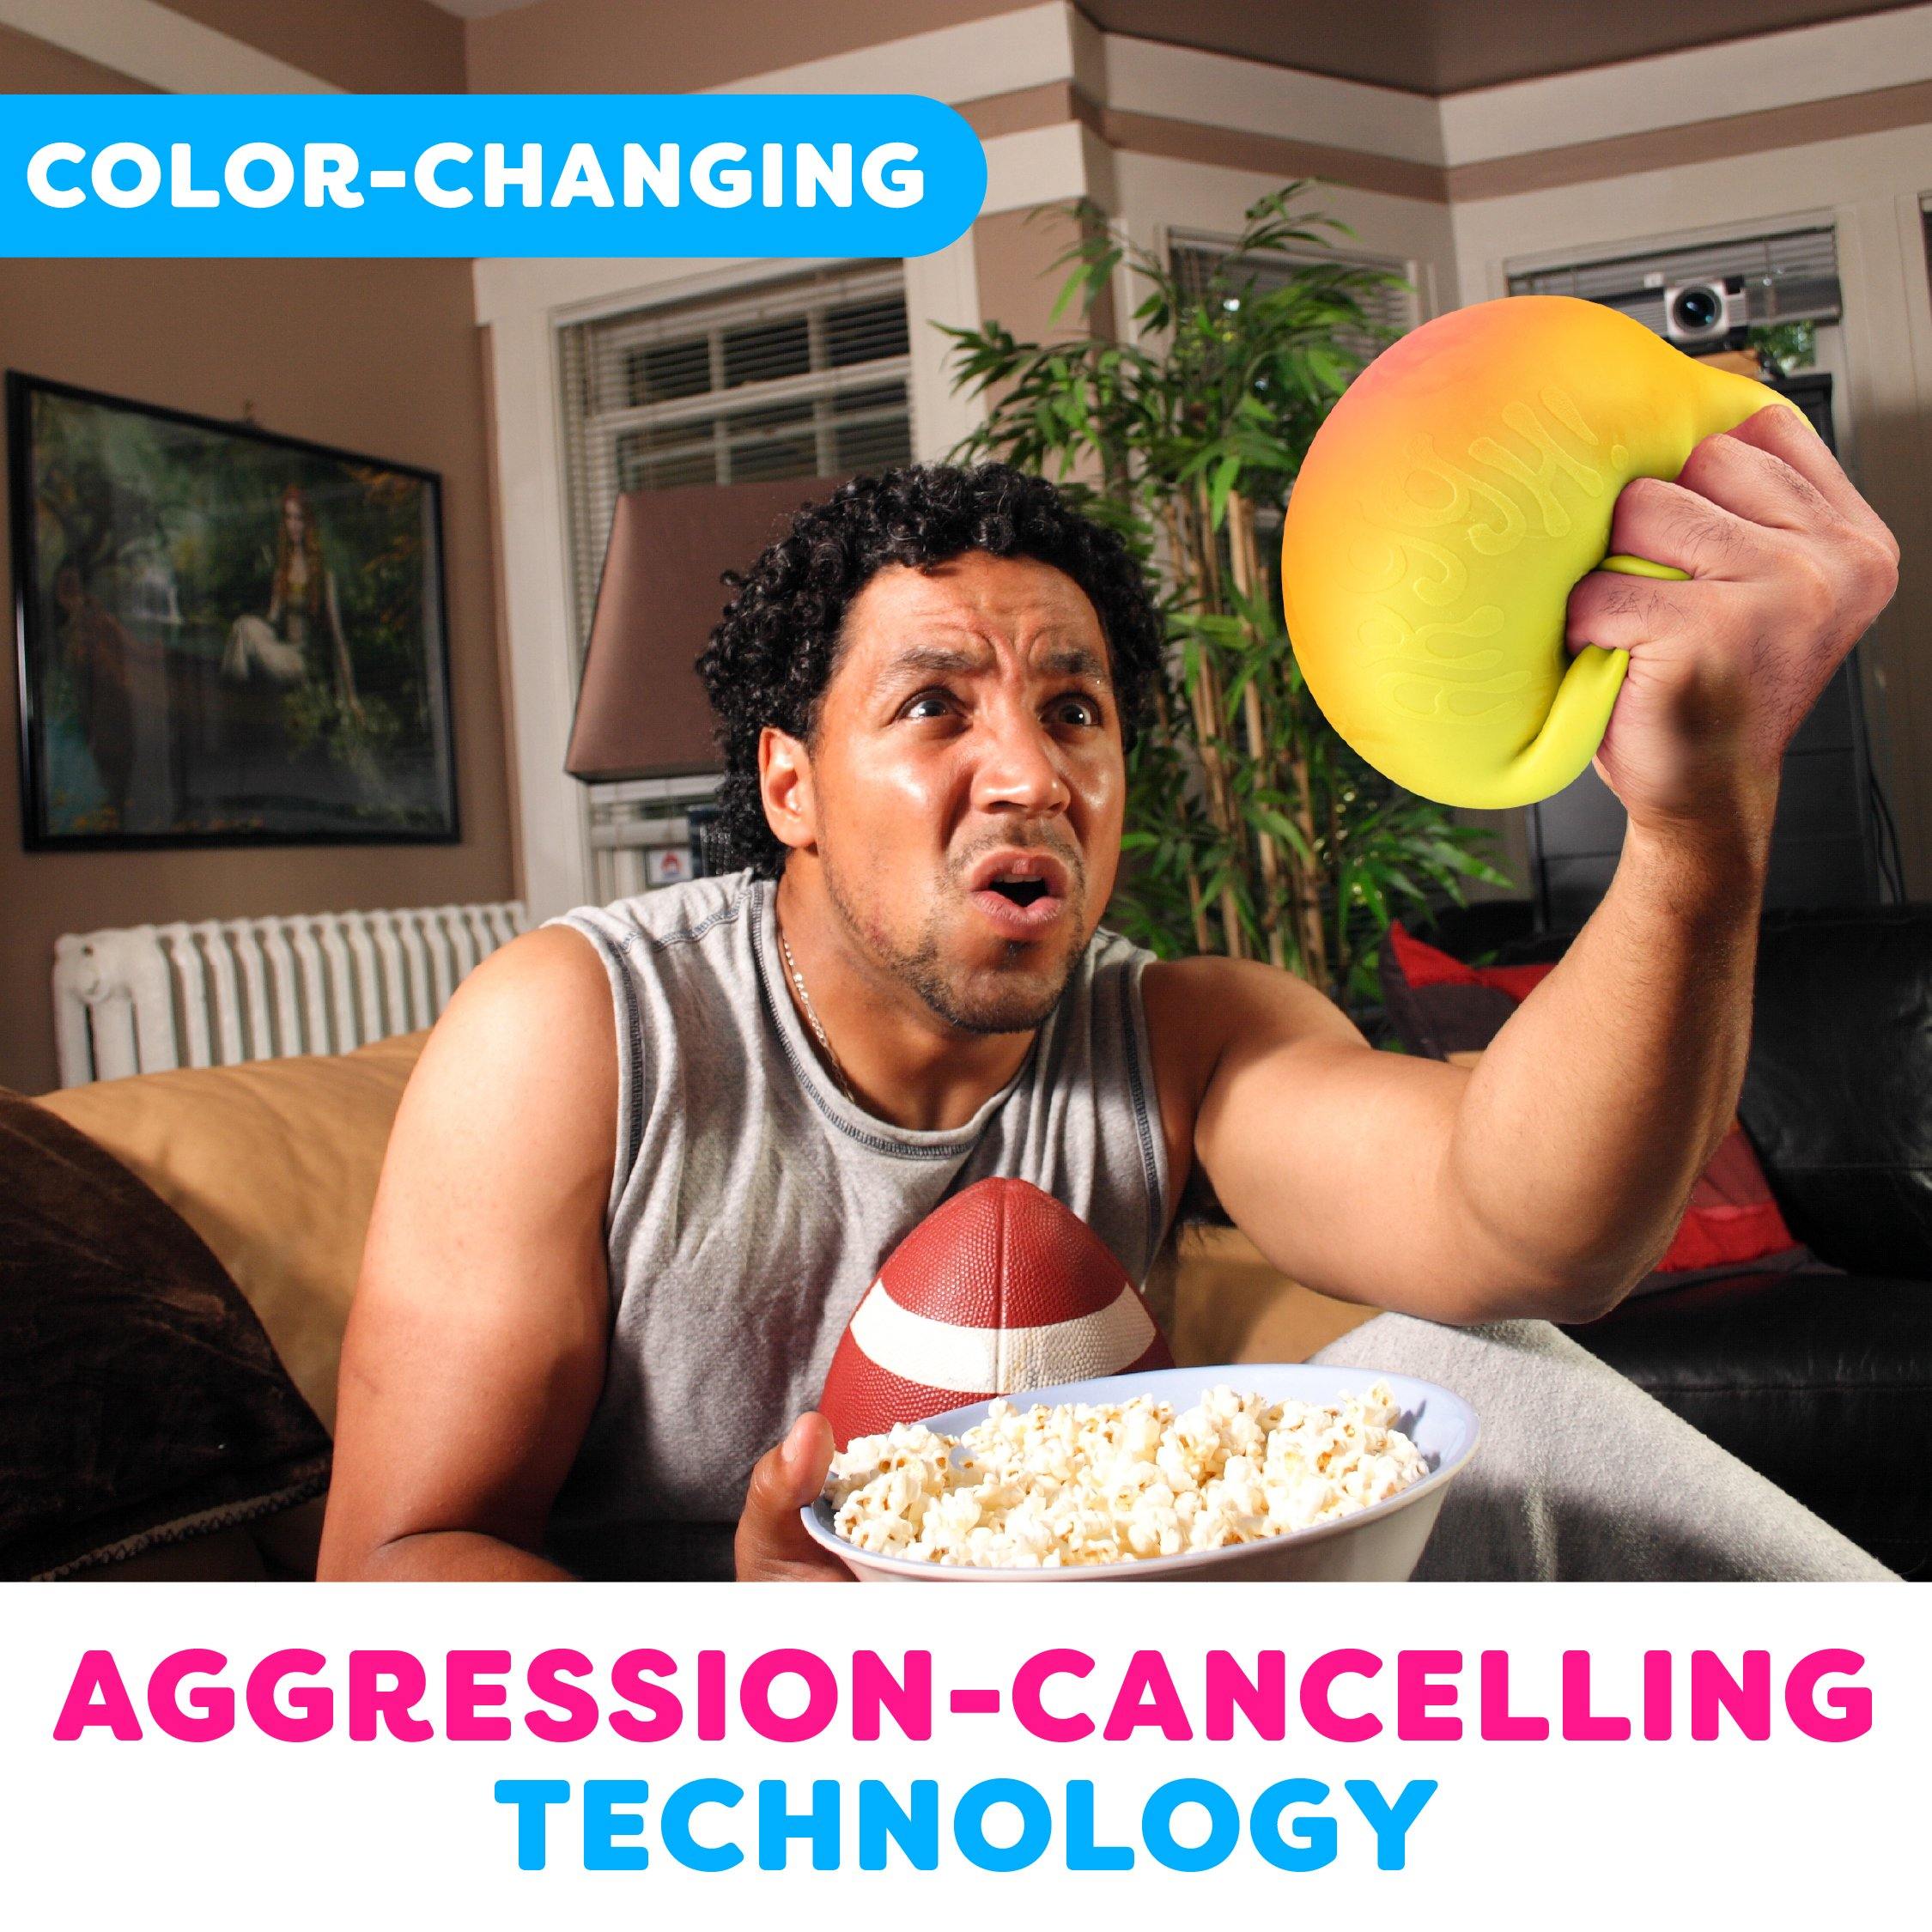 Power Your Fun Arggh! Color Changing Giant Stress Ball